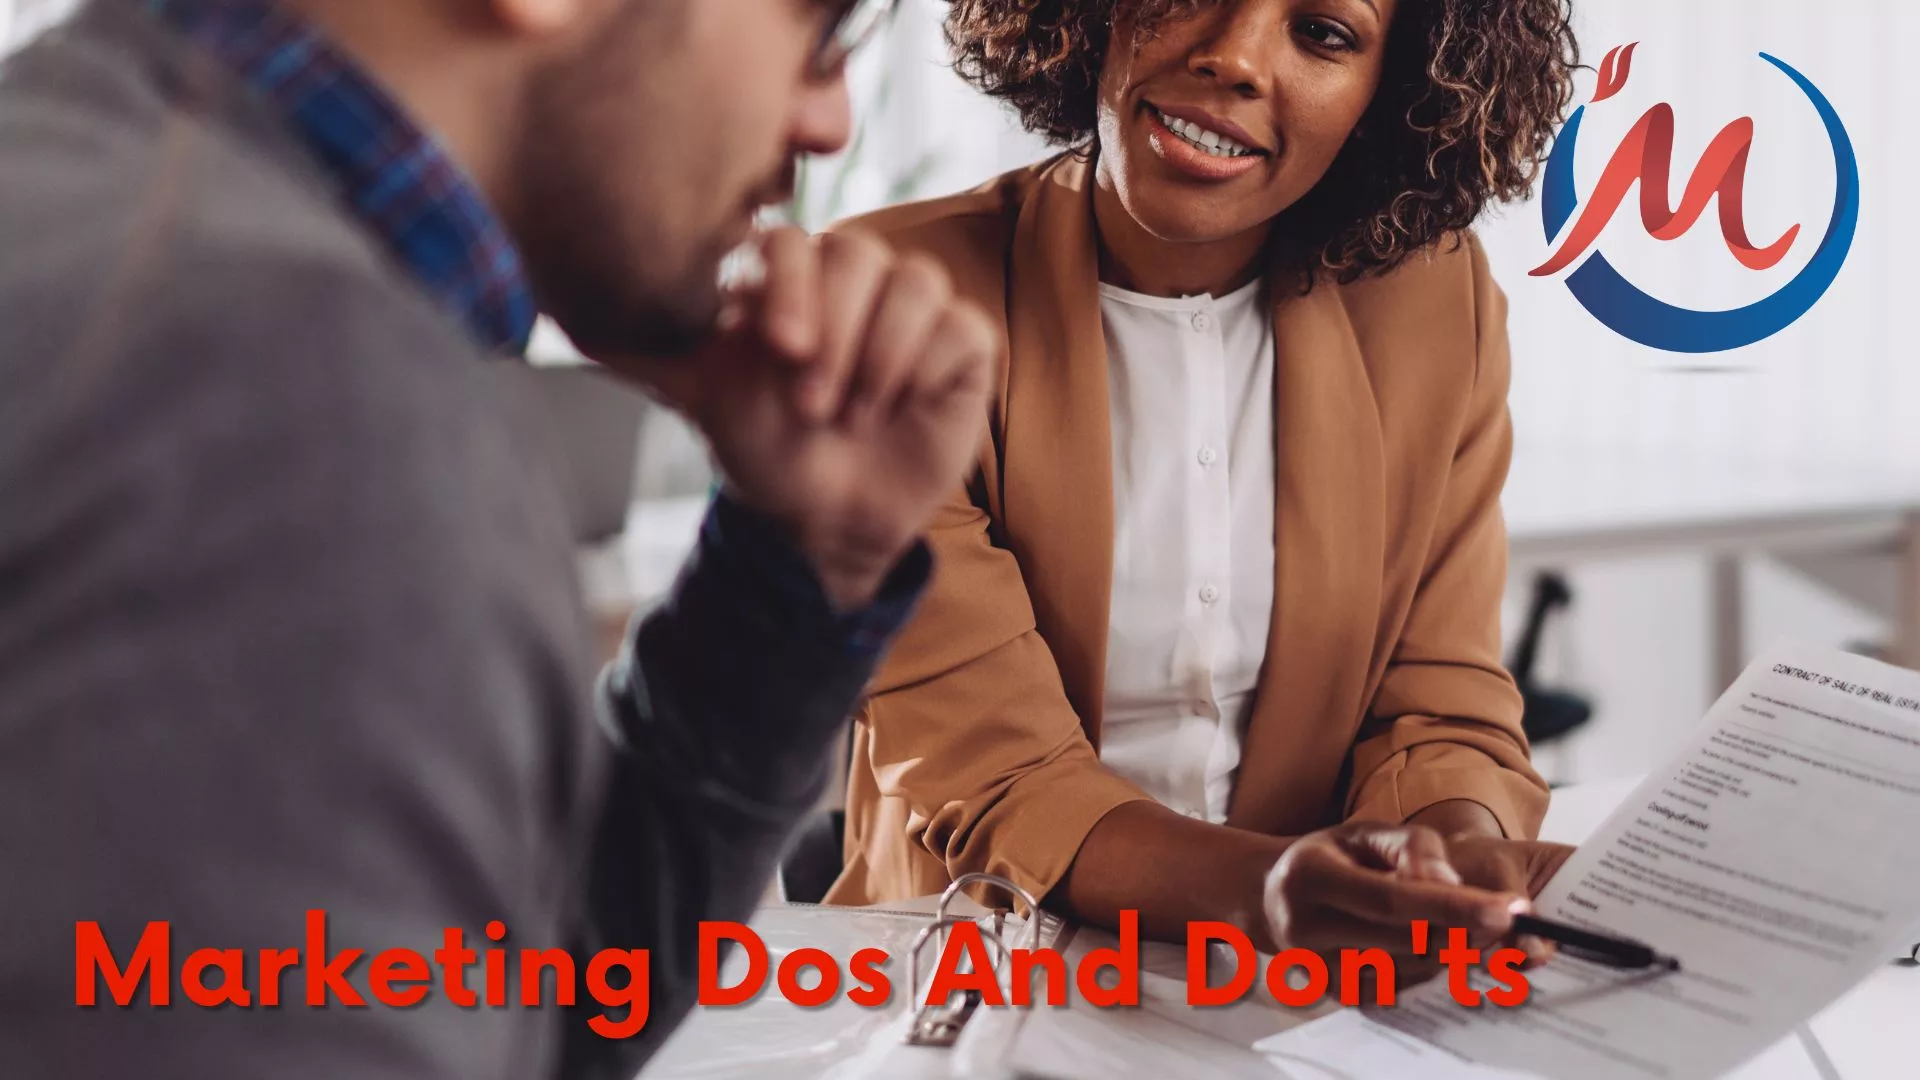 Marketing Dos And Don’ts By Inspired Method